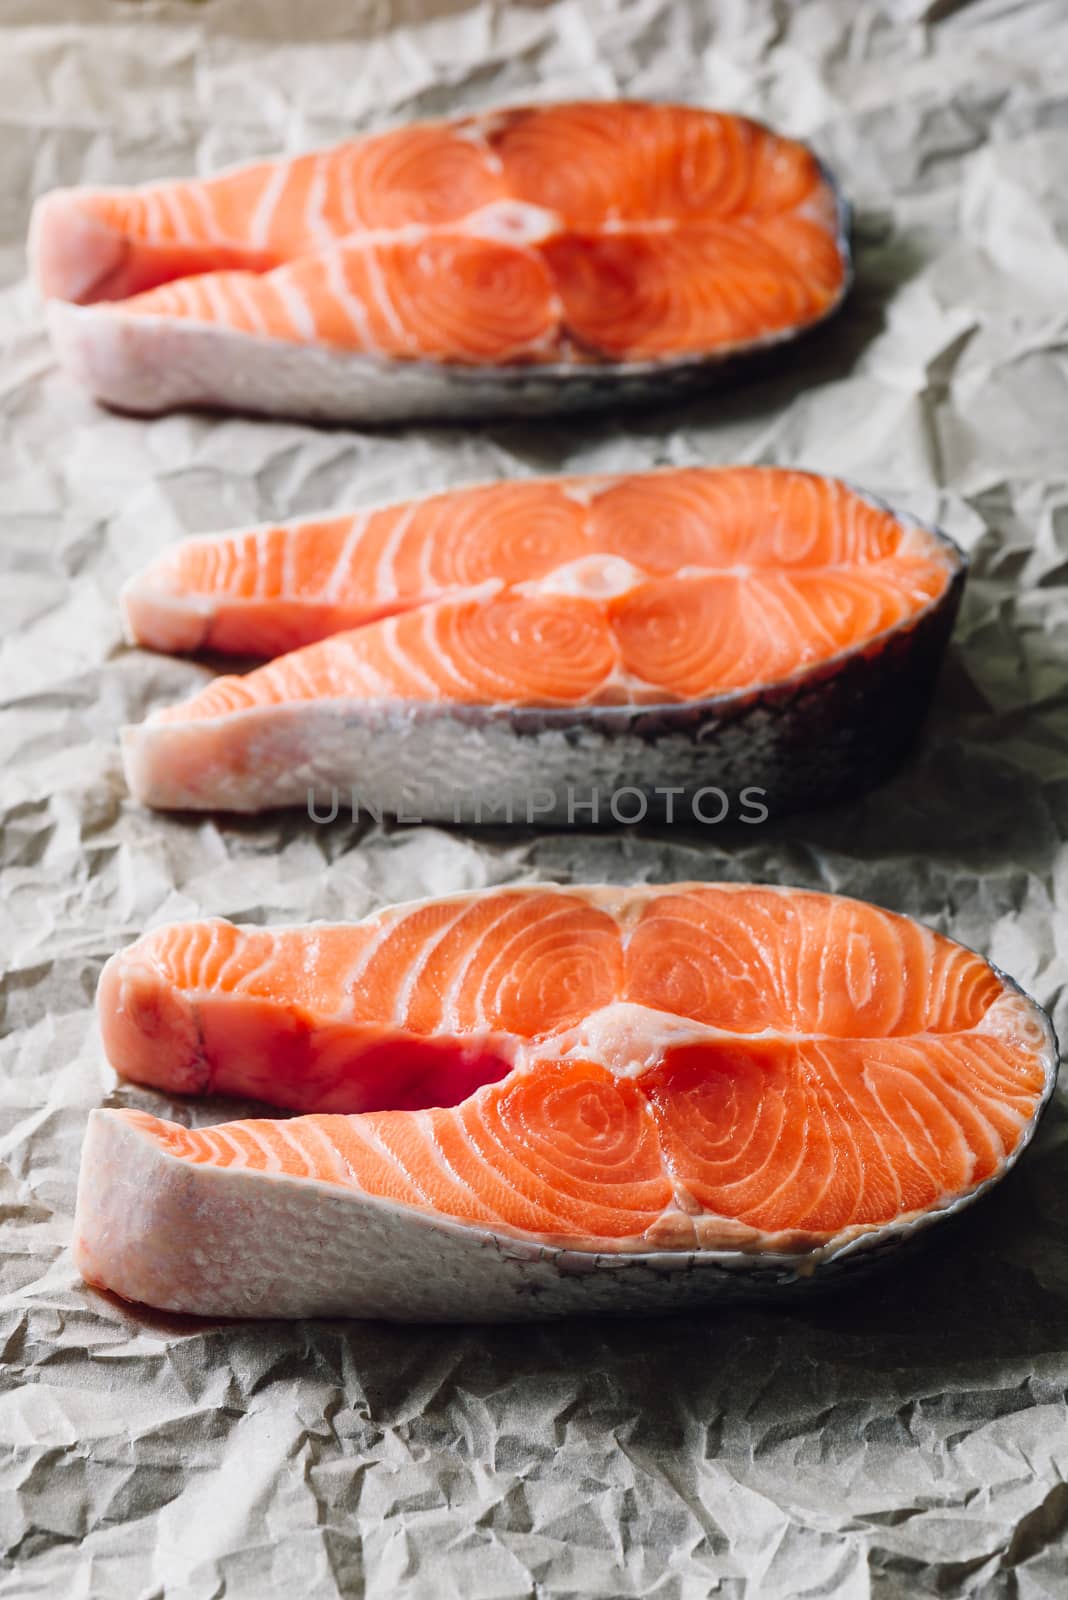 Three Raw Salmon Steaks on Parchment Paper. Vertical.